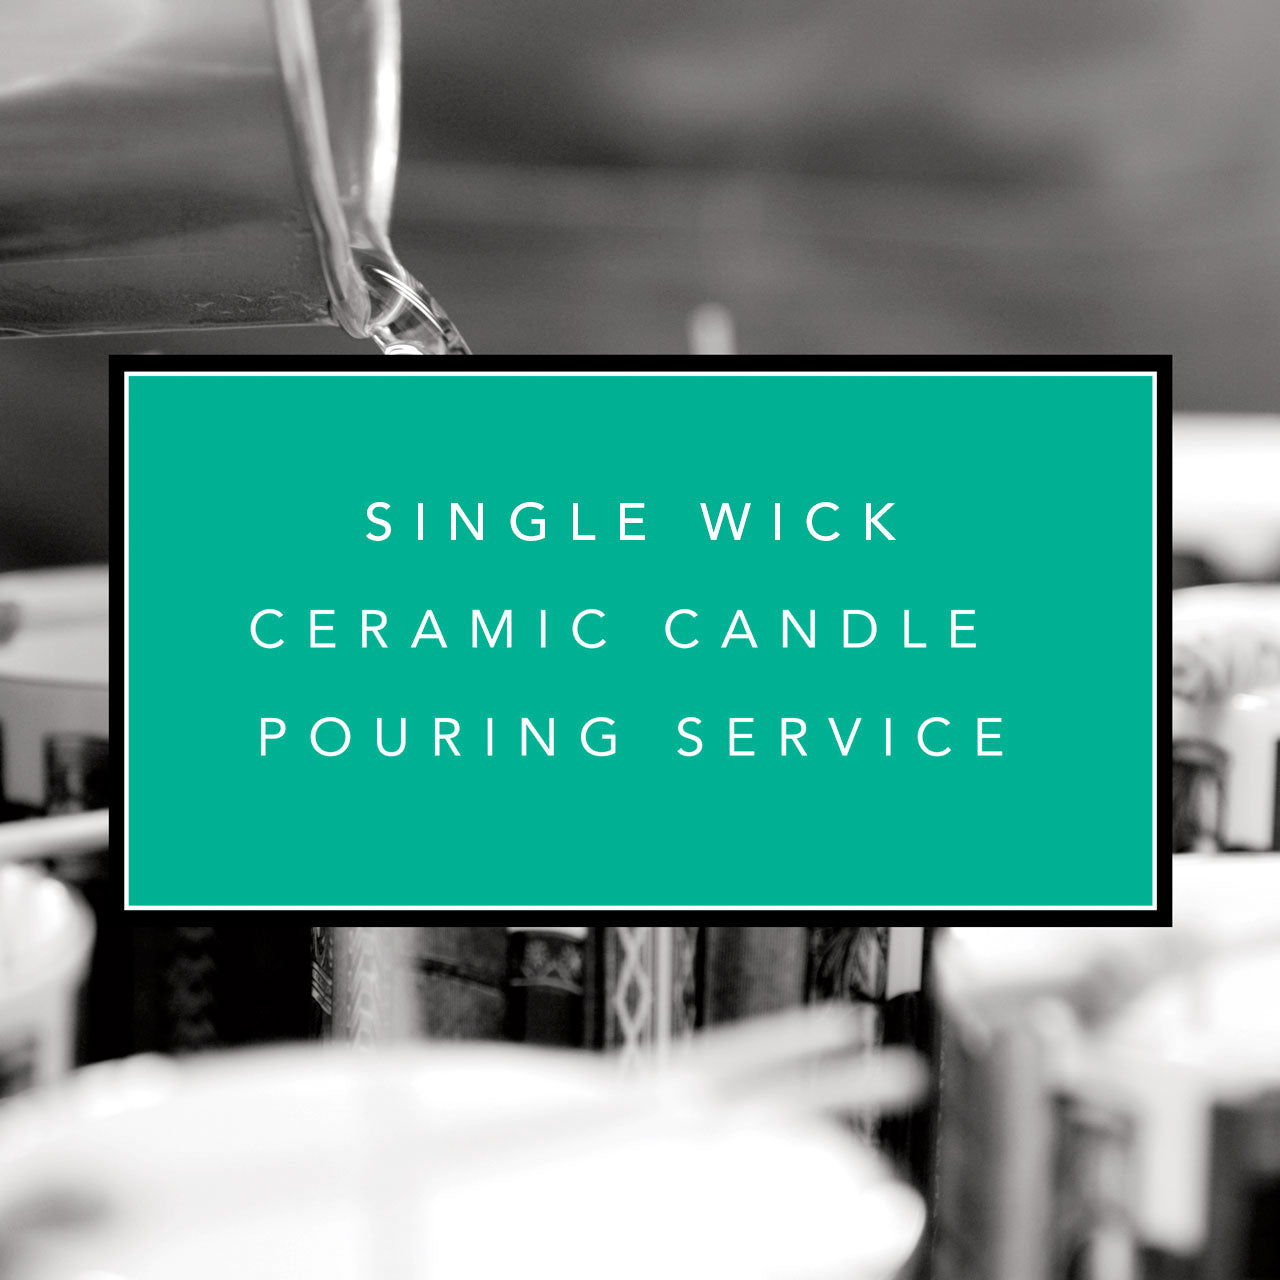 Refill Service for Single Wick Ceramic Candles